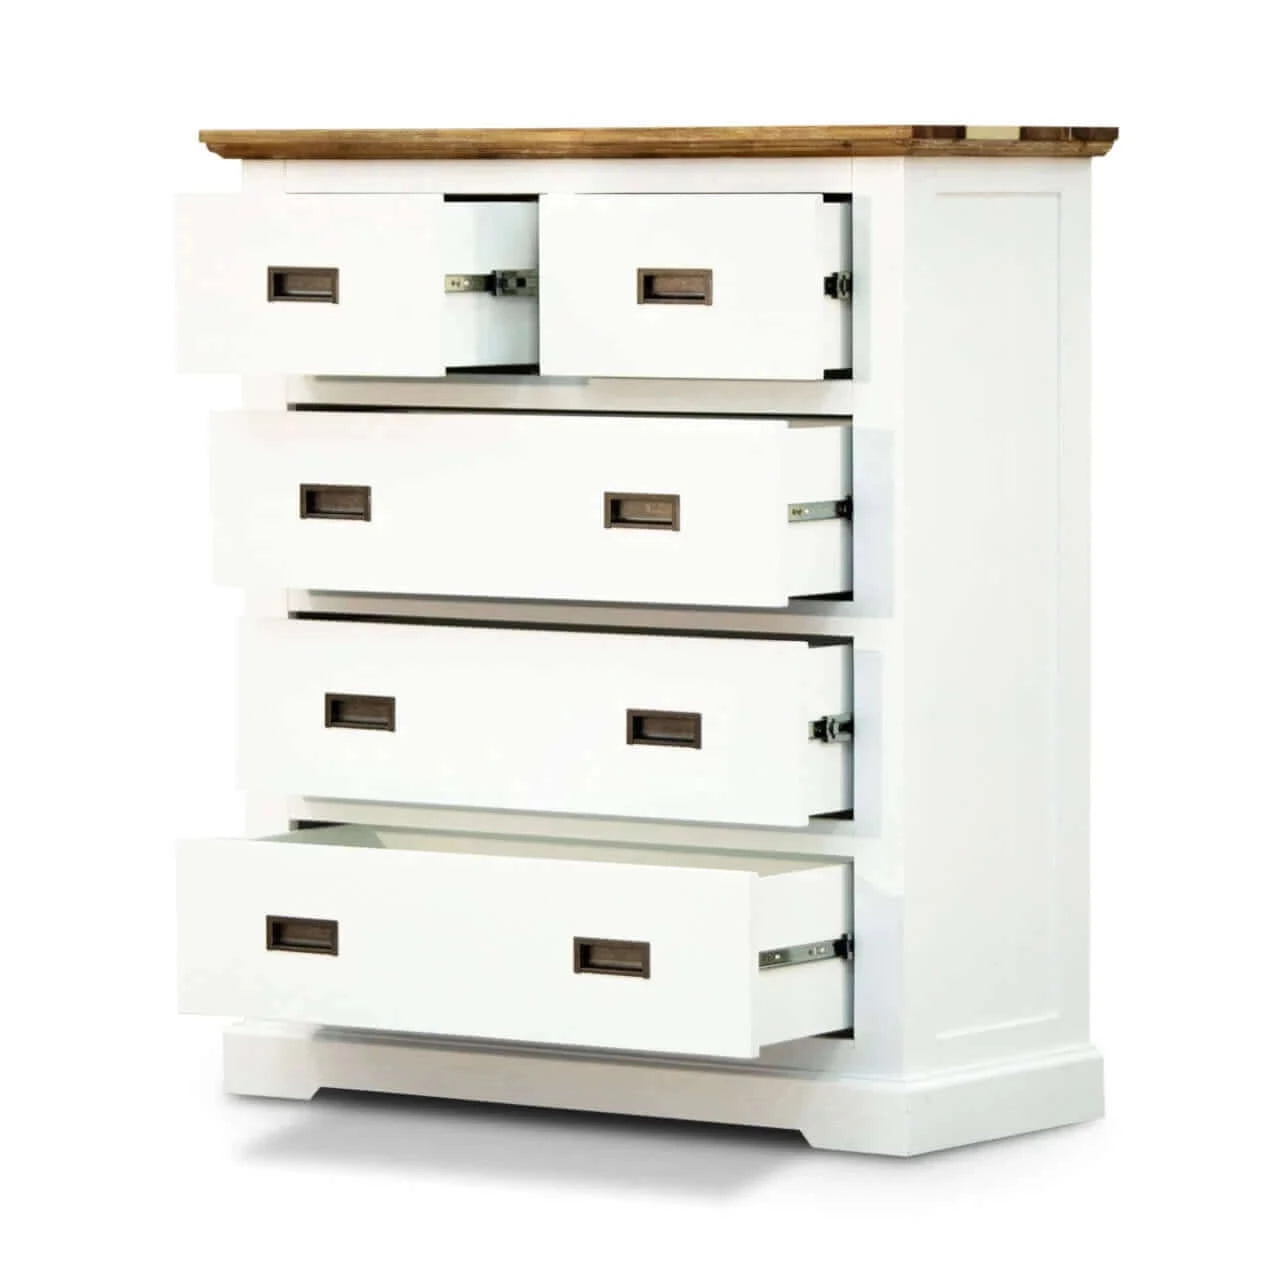 Buy orville tallboy 5 chest of drawers solid wood storage cabinet - multi color - upinteriors-Upinteriors